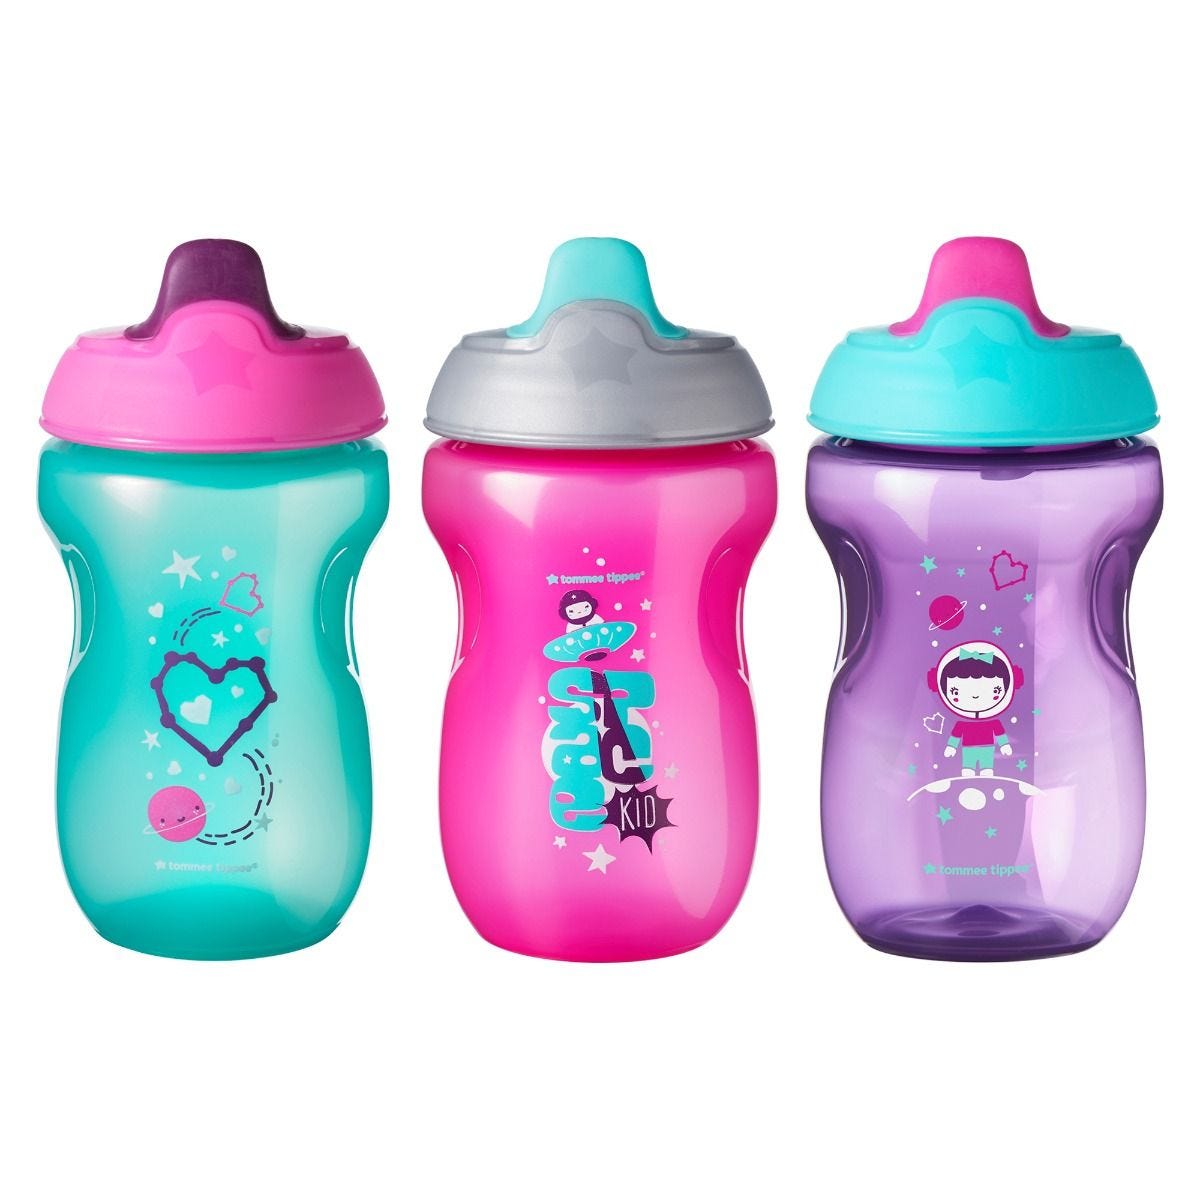 Tommee Tippee Destete Sippee 4 meses 